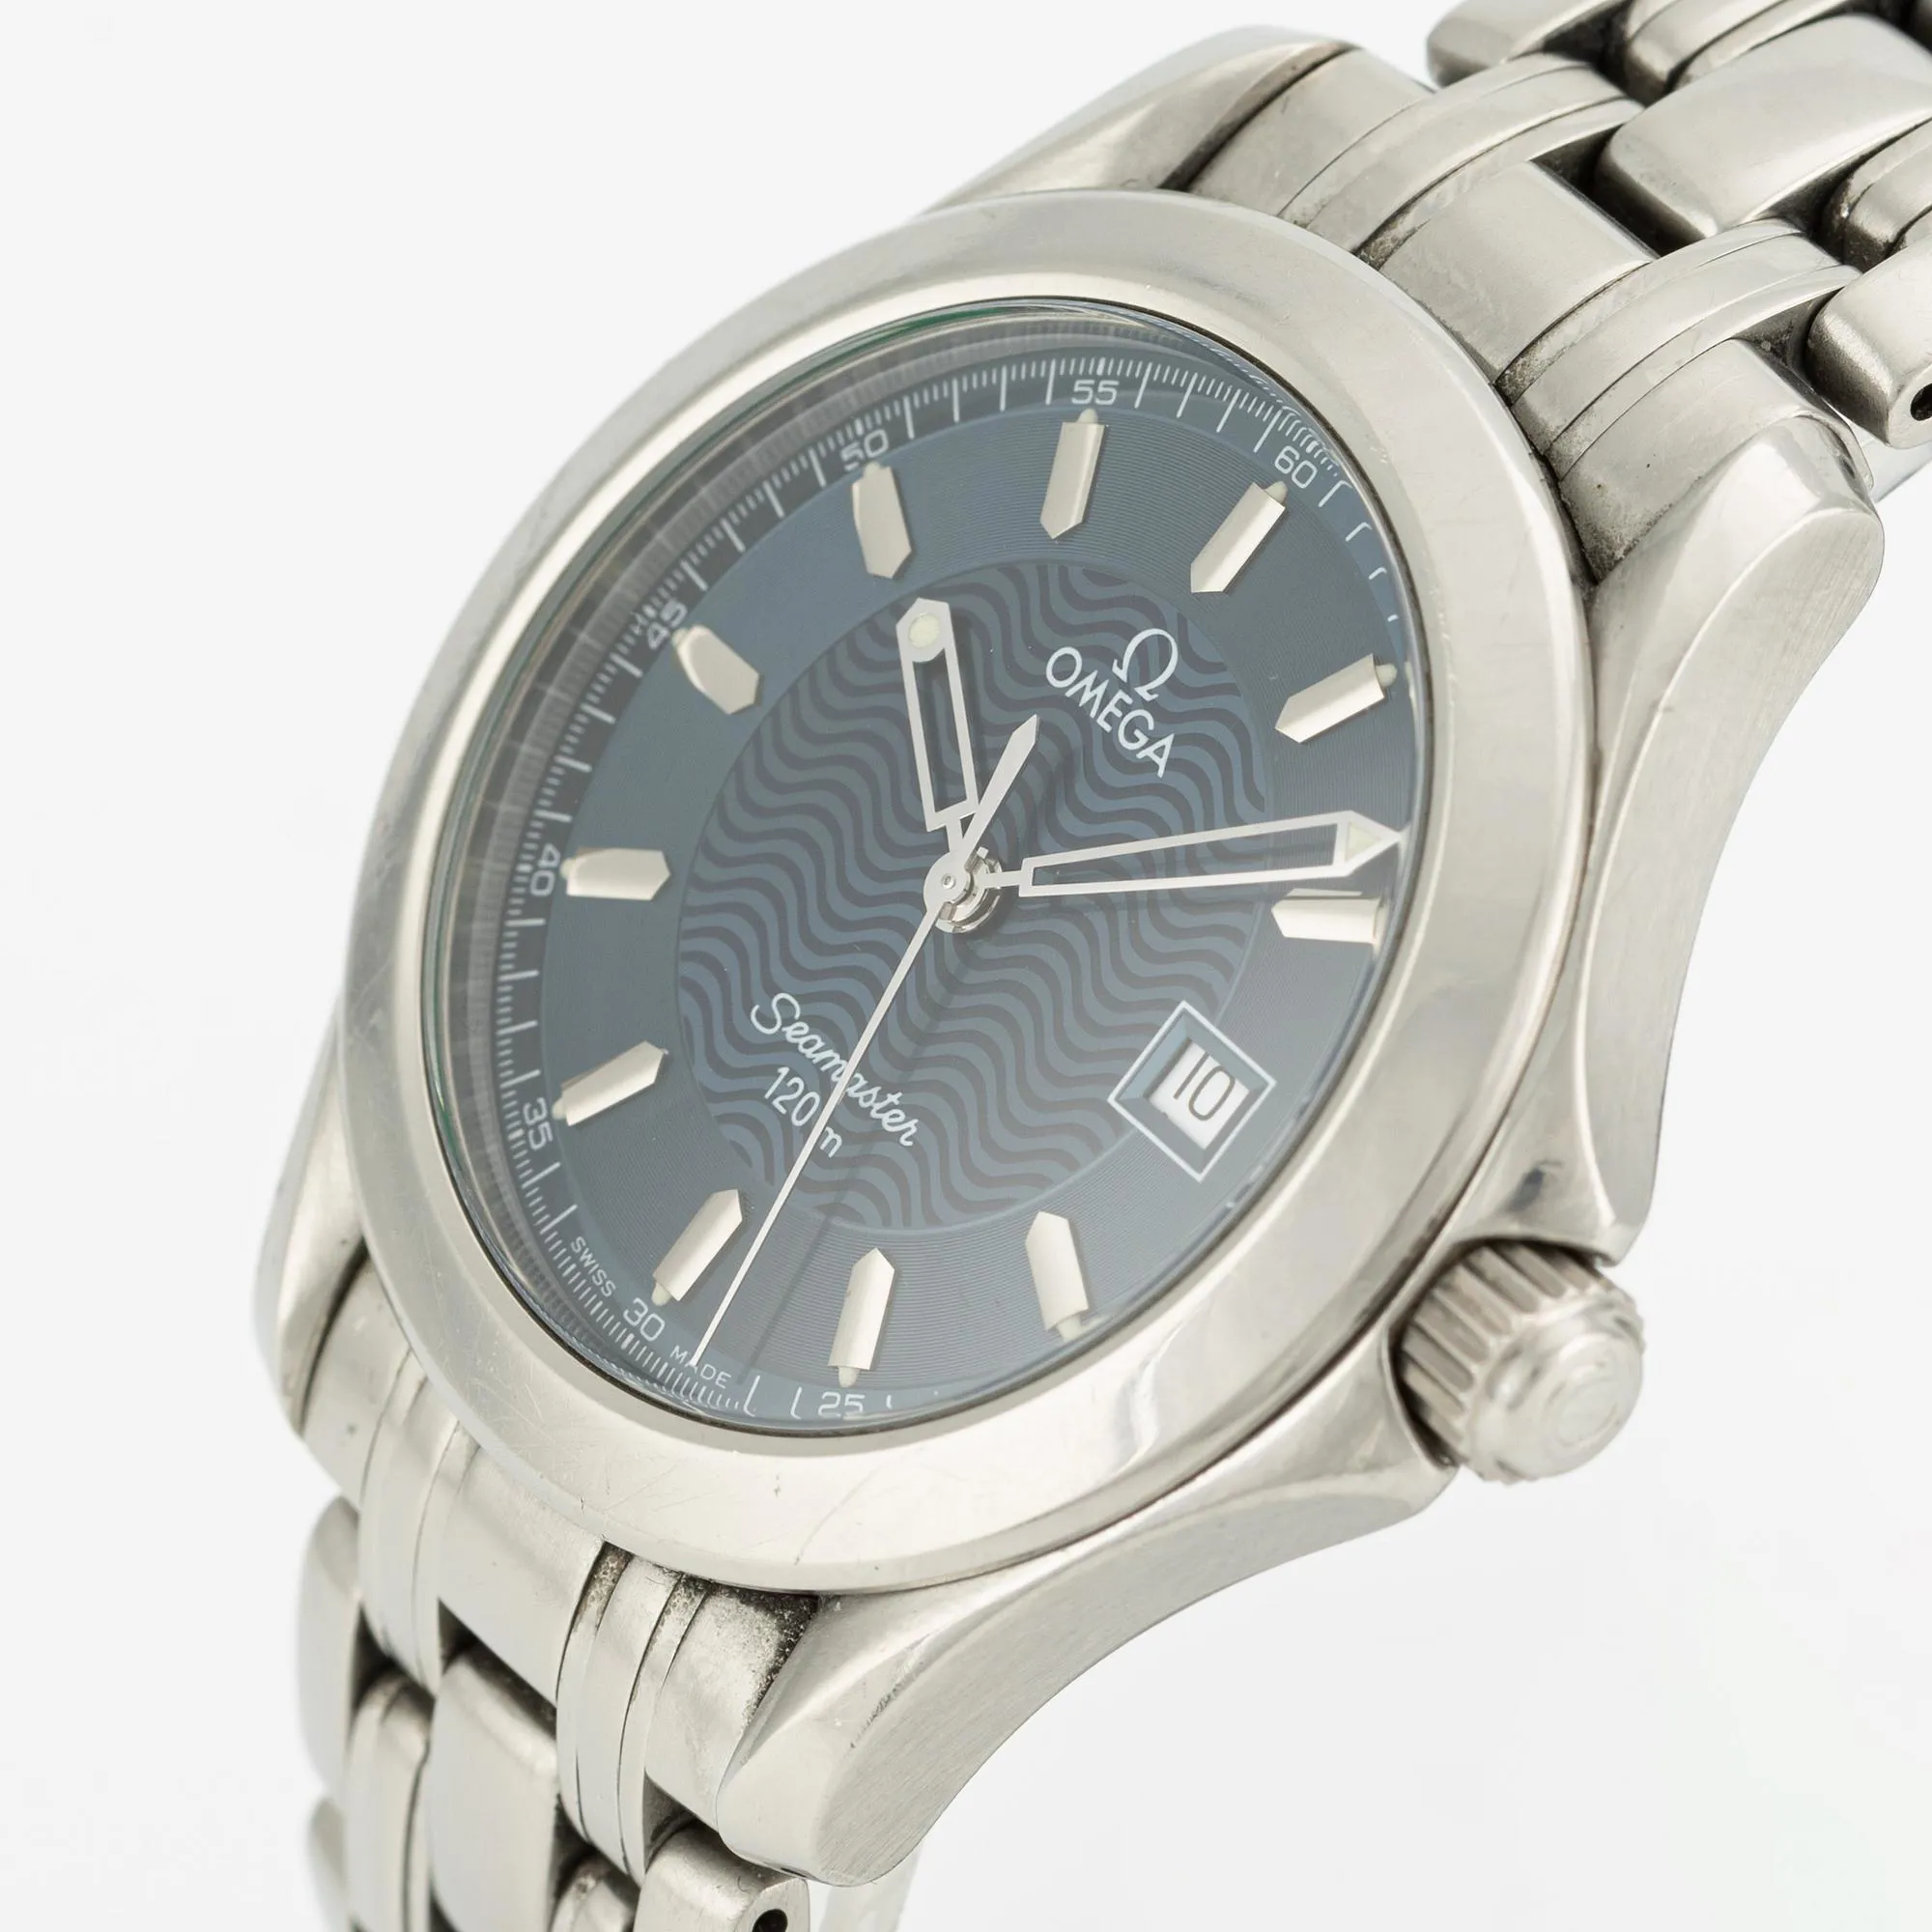 Omega Seamaster 1501/823 36mm Stainless steel 1